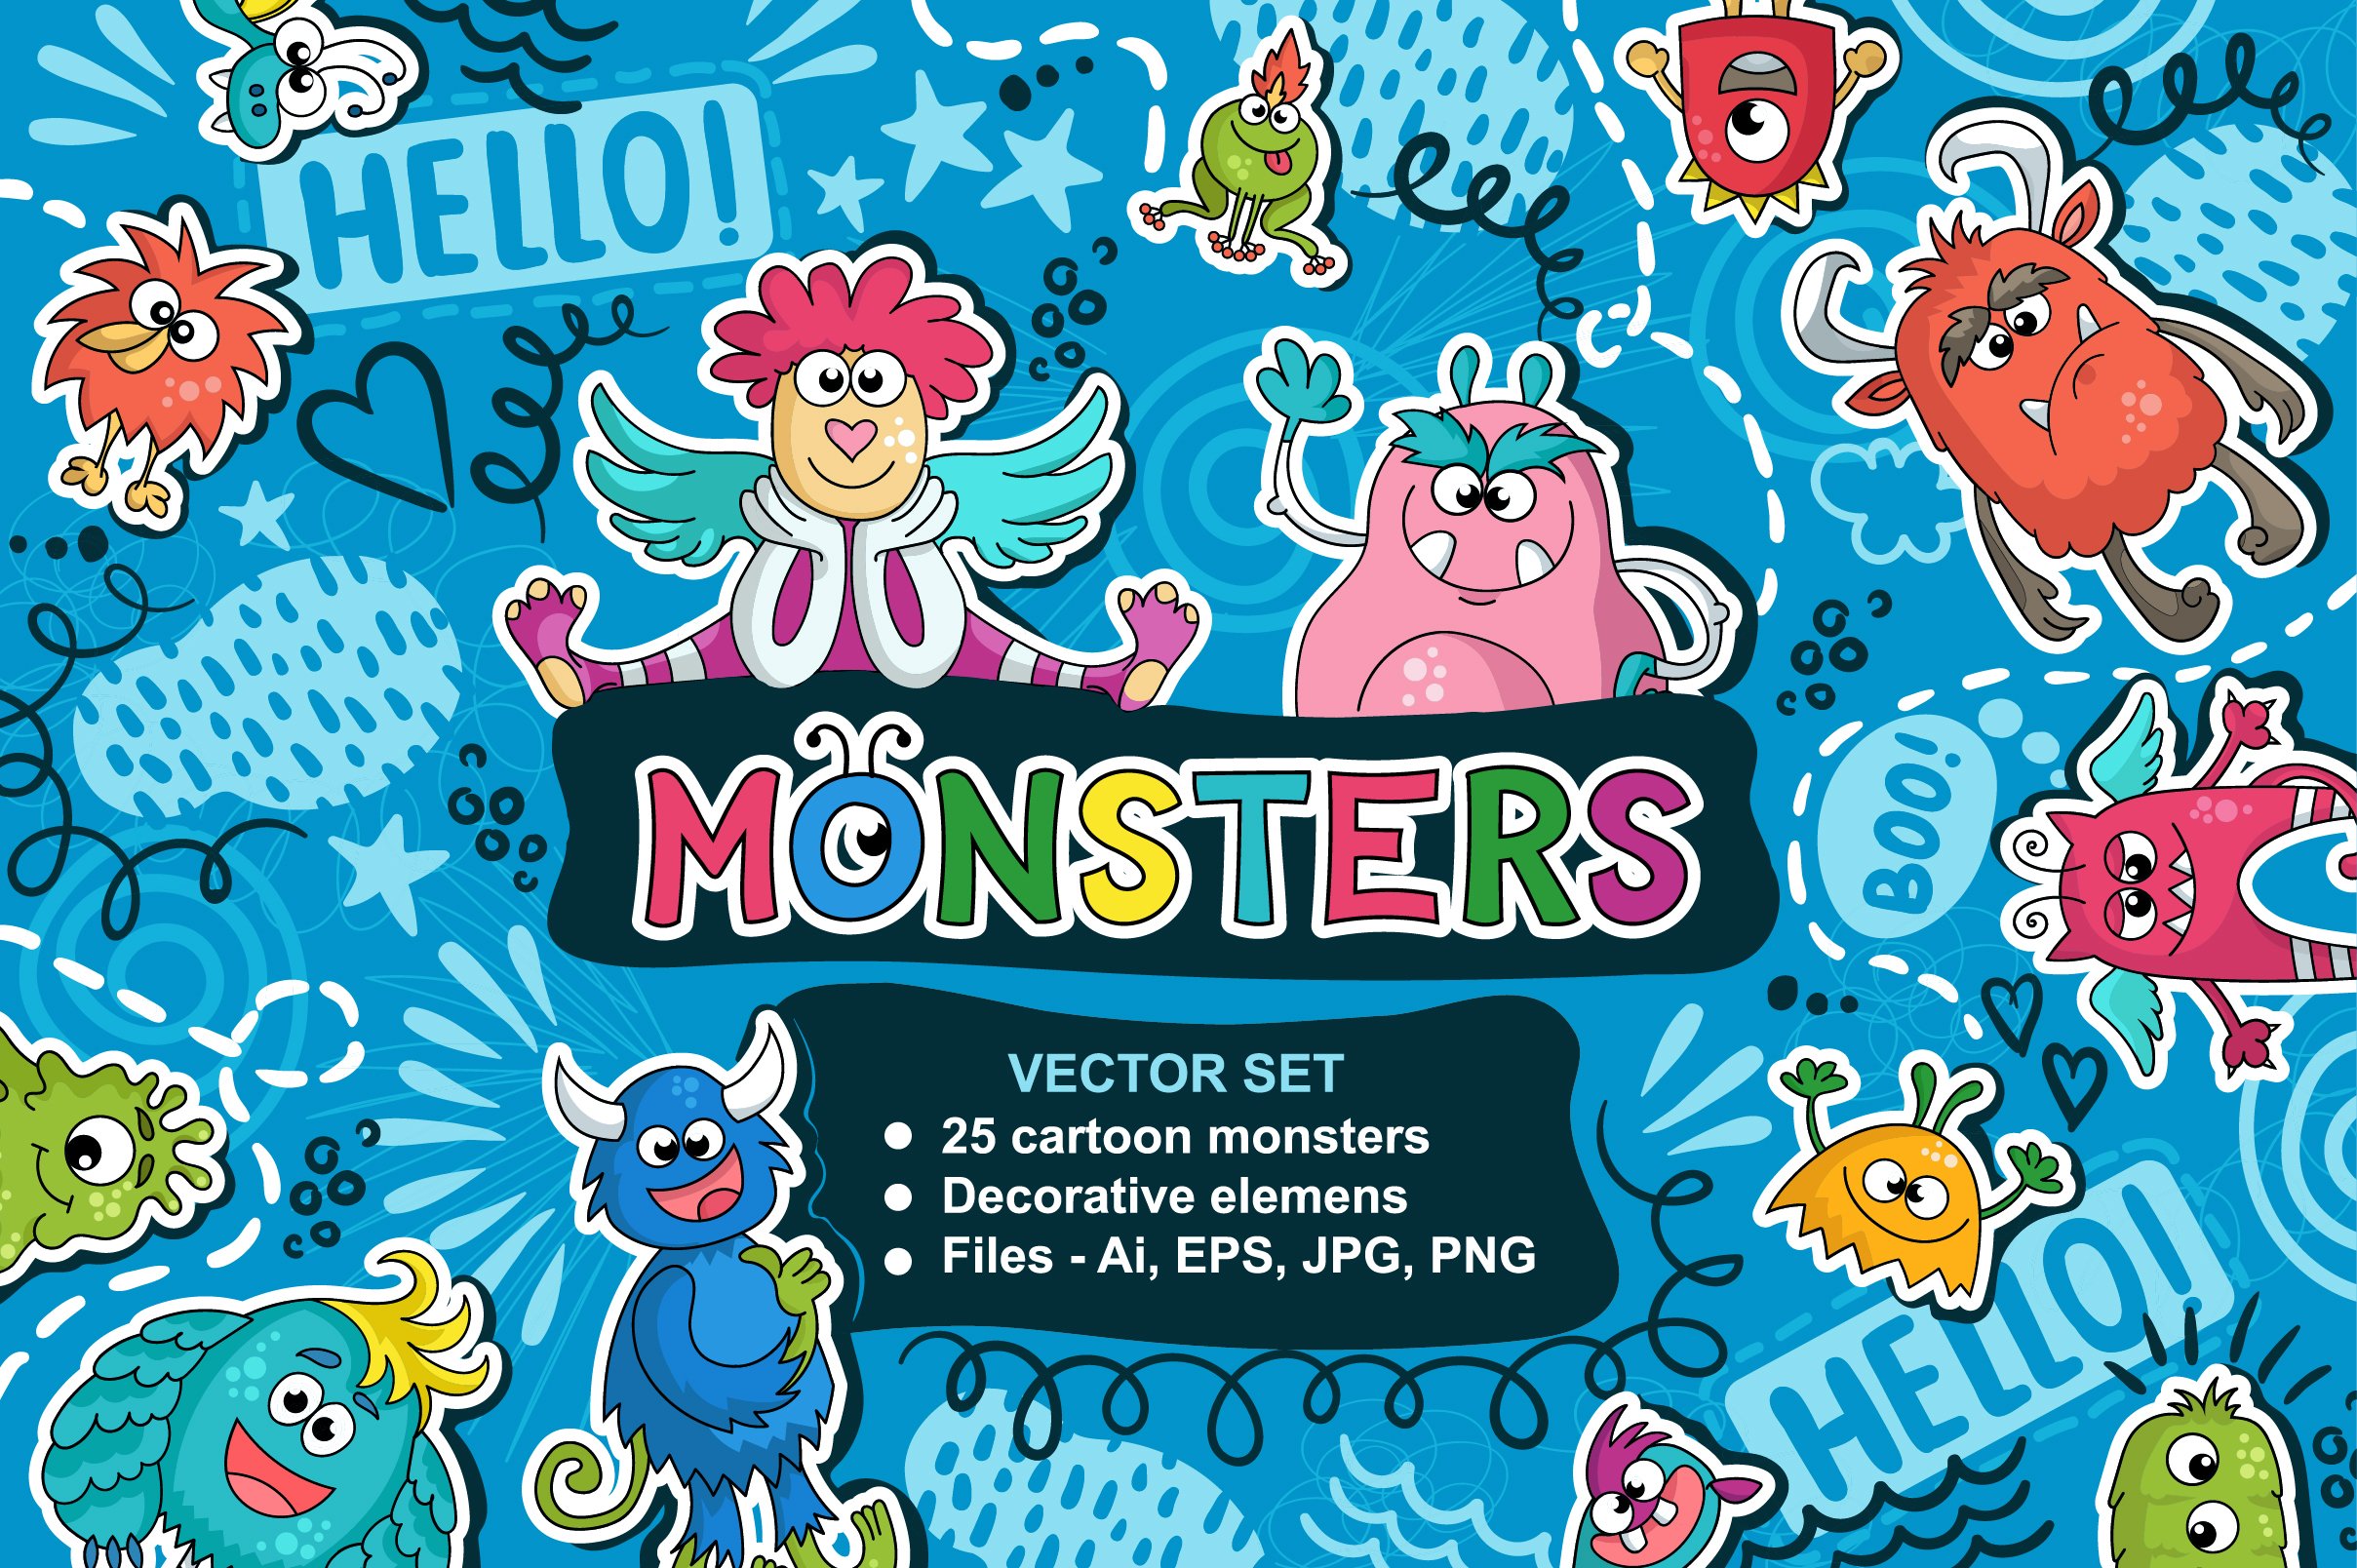 Vector cartoon set with monsters cover image.